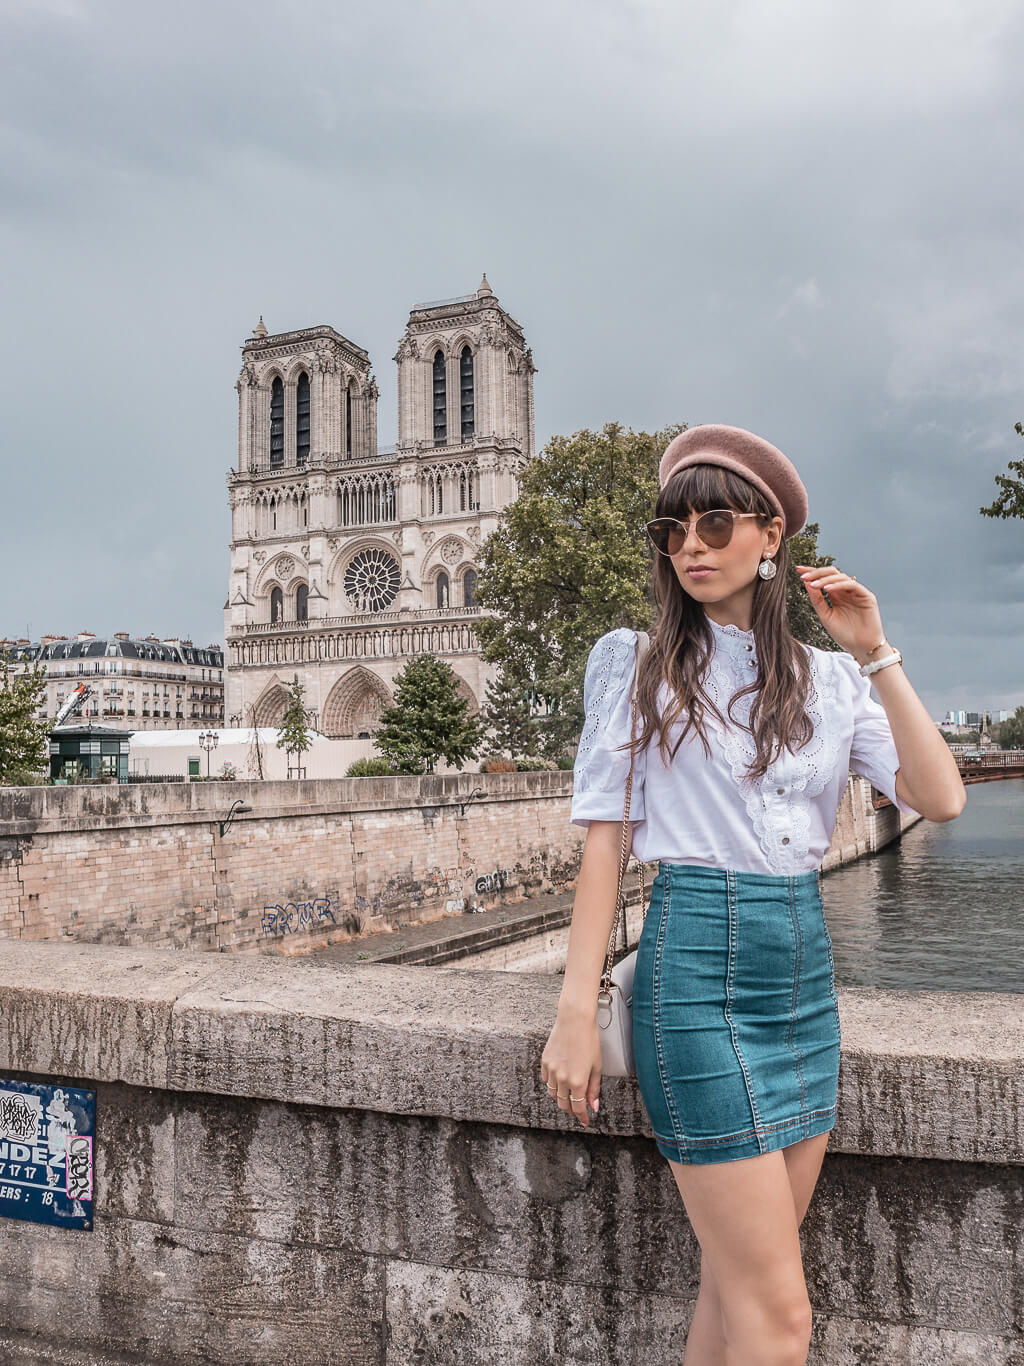 Paris photography guide - the beautiful aesthetic of the most romantic city in the world { Paris in pictures }